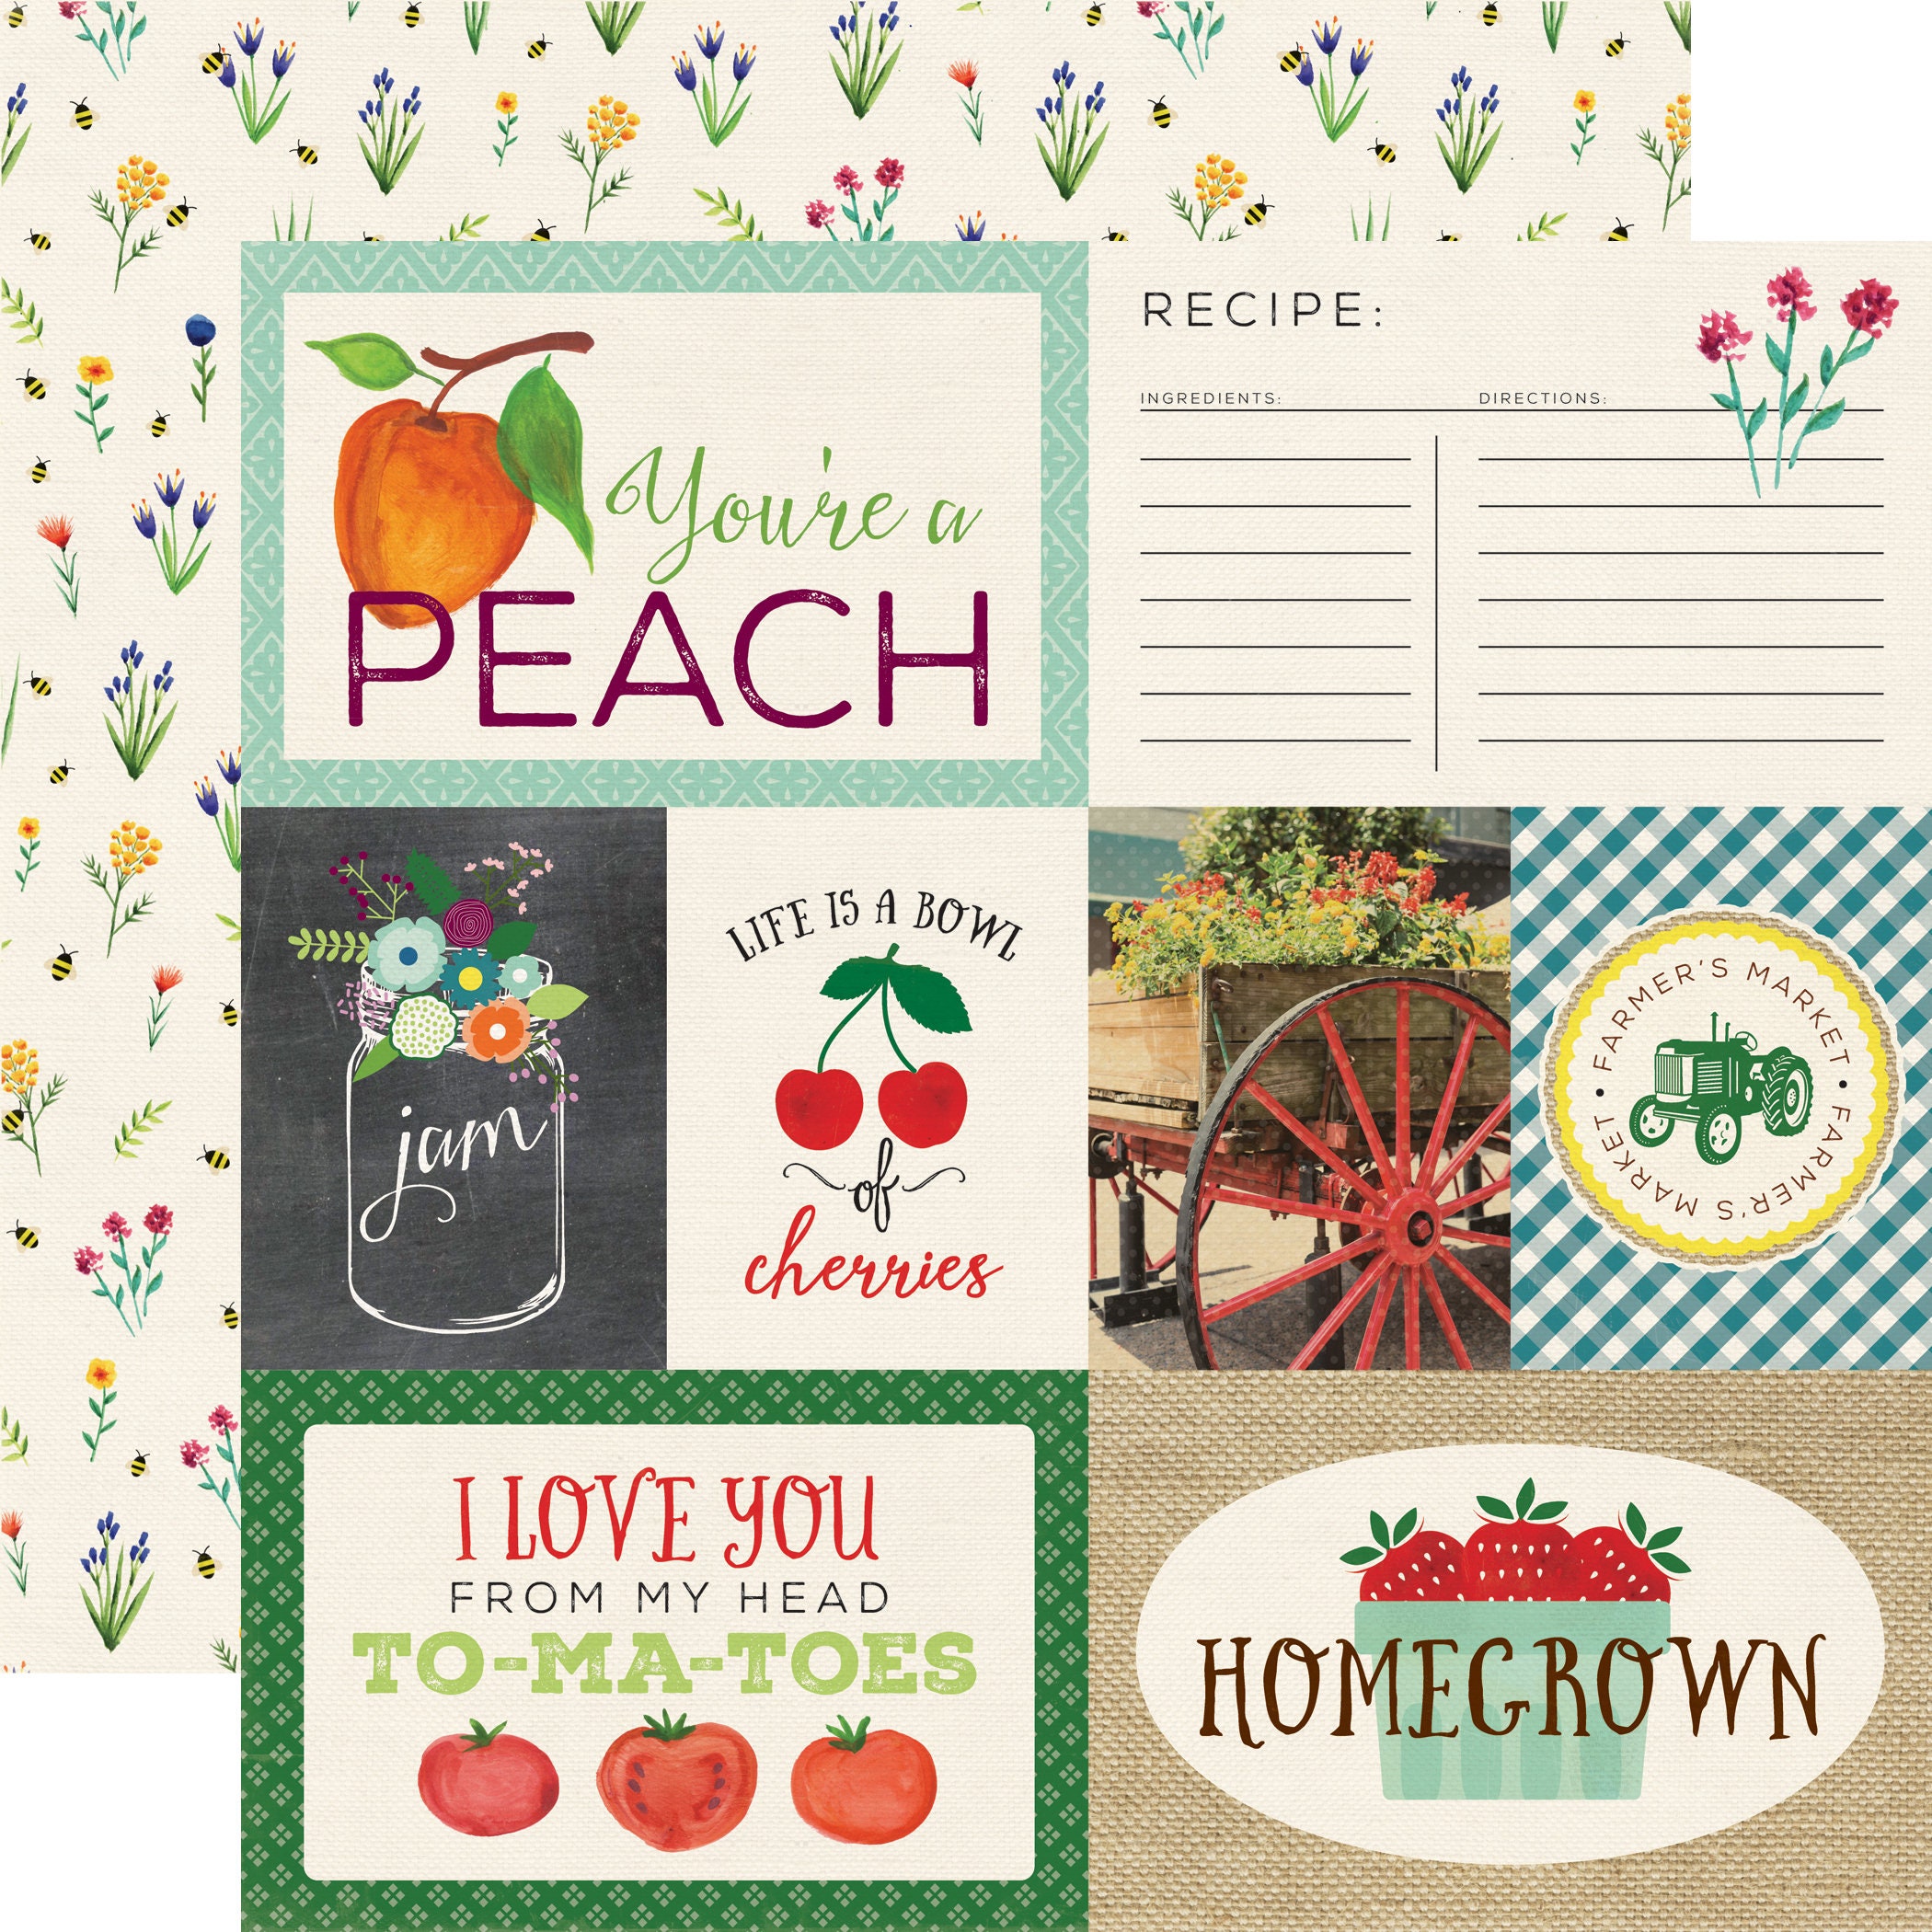 Echo Park Collection Kit 12x12 Homegrown